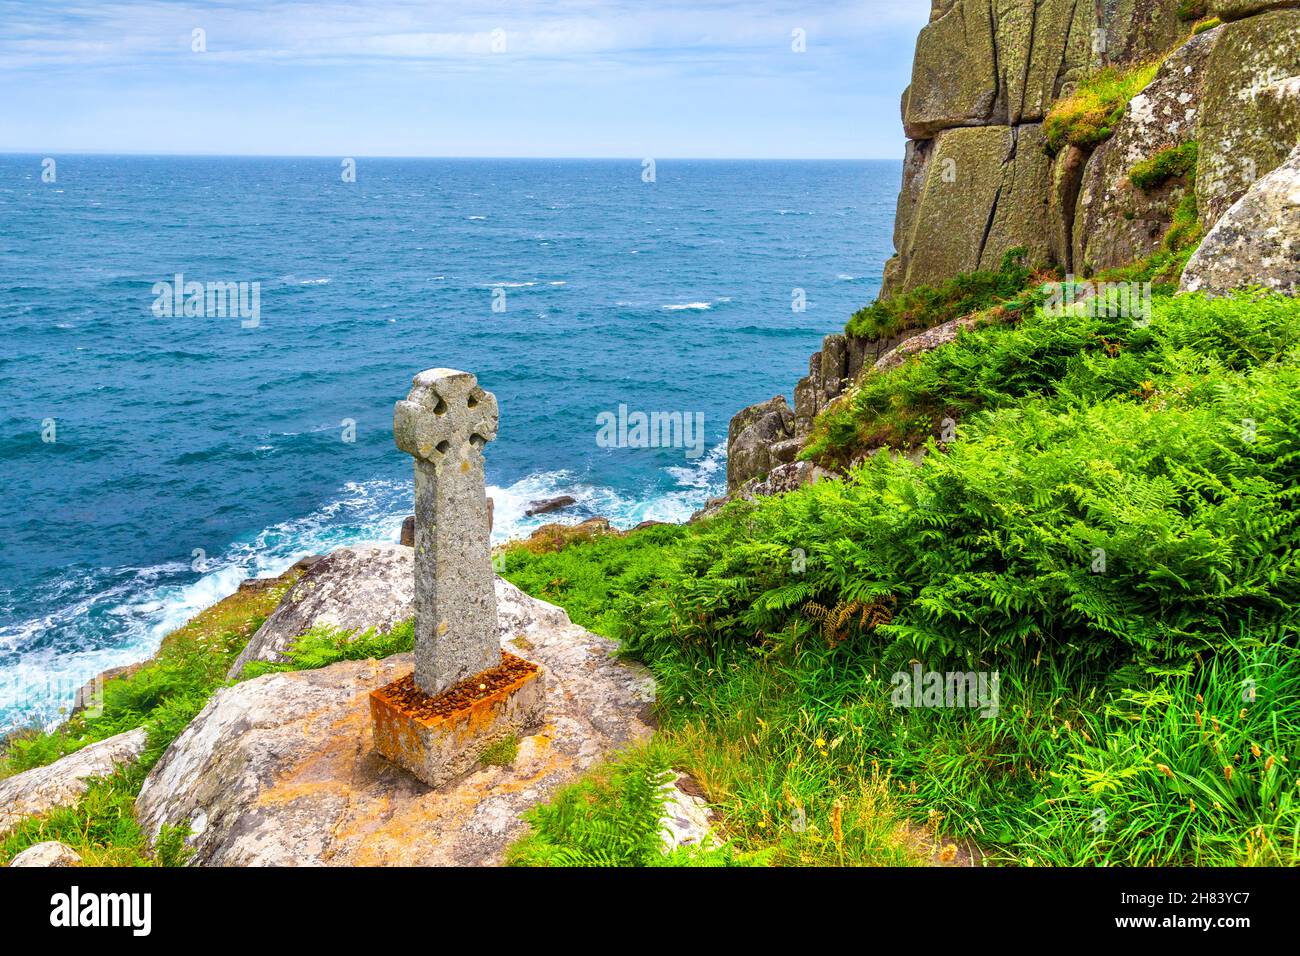 Celtic cross commemorating the death of David Wordsworth Watson, who fell from Carn Mellyn cliffs in 1873 near Lamorna Cove, Cornwall, UK Stock Photo